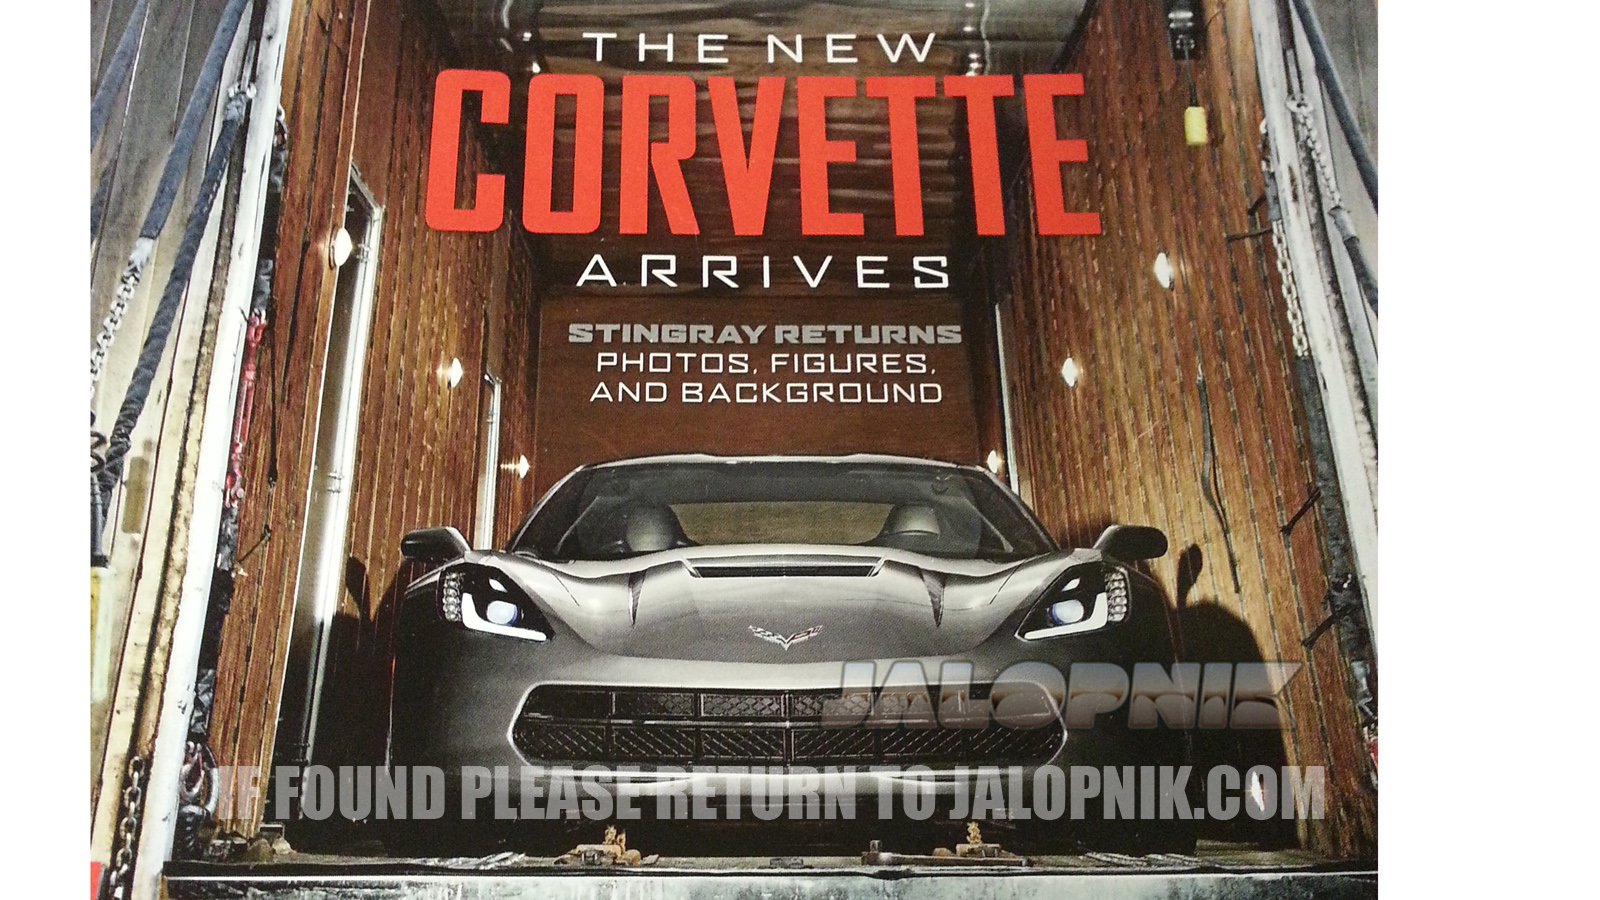 Road & Track Cover Leaked: Here's the 2014 C7 Corvette!